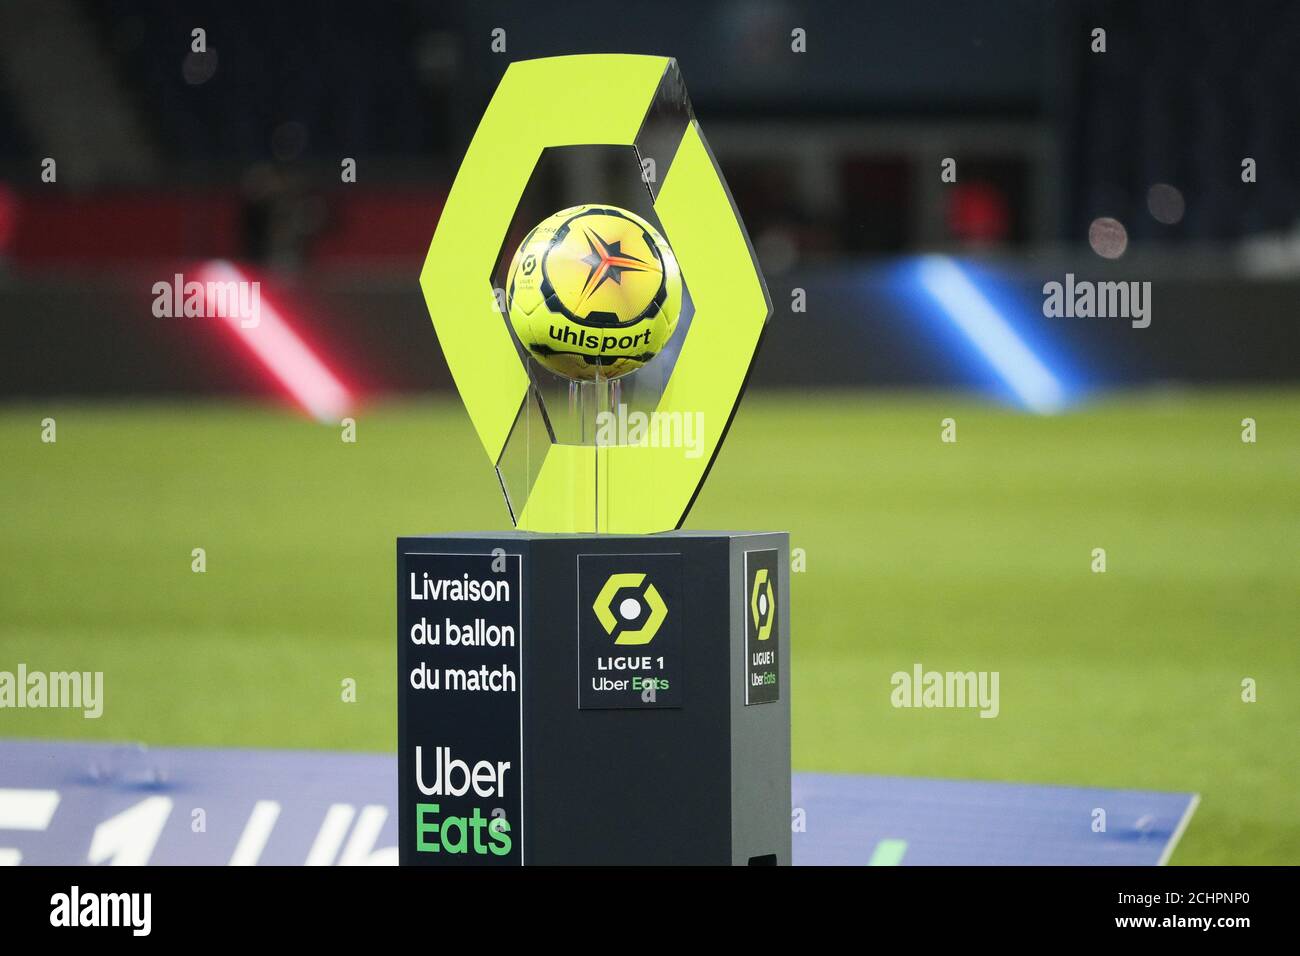 Illustration of the official ball Ligue 1 Uber Eats Elysia by Uhlsport  saison 2020 - 2021during the French championship Ligue 1 football match Uber  Ea Stock Photo - Alamy